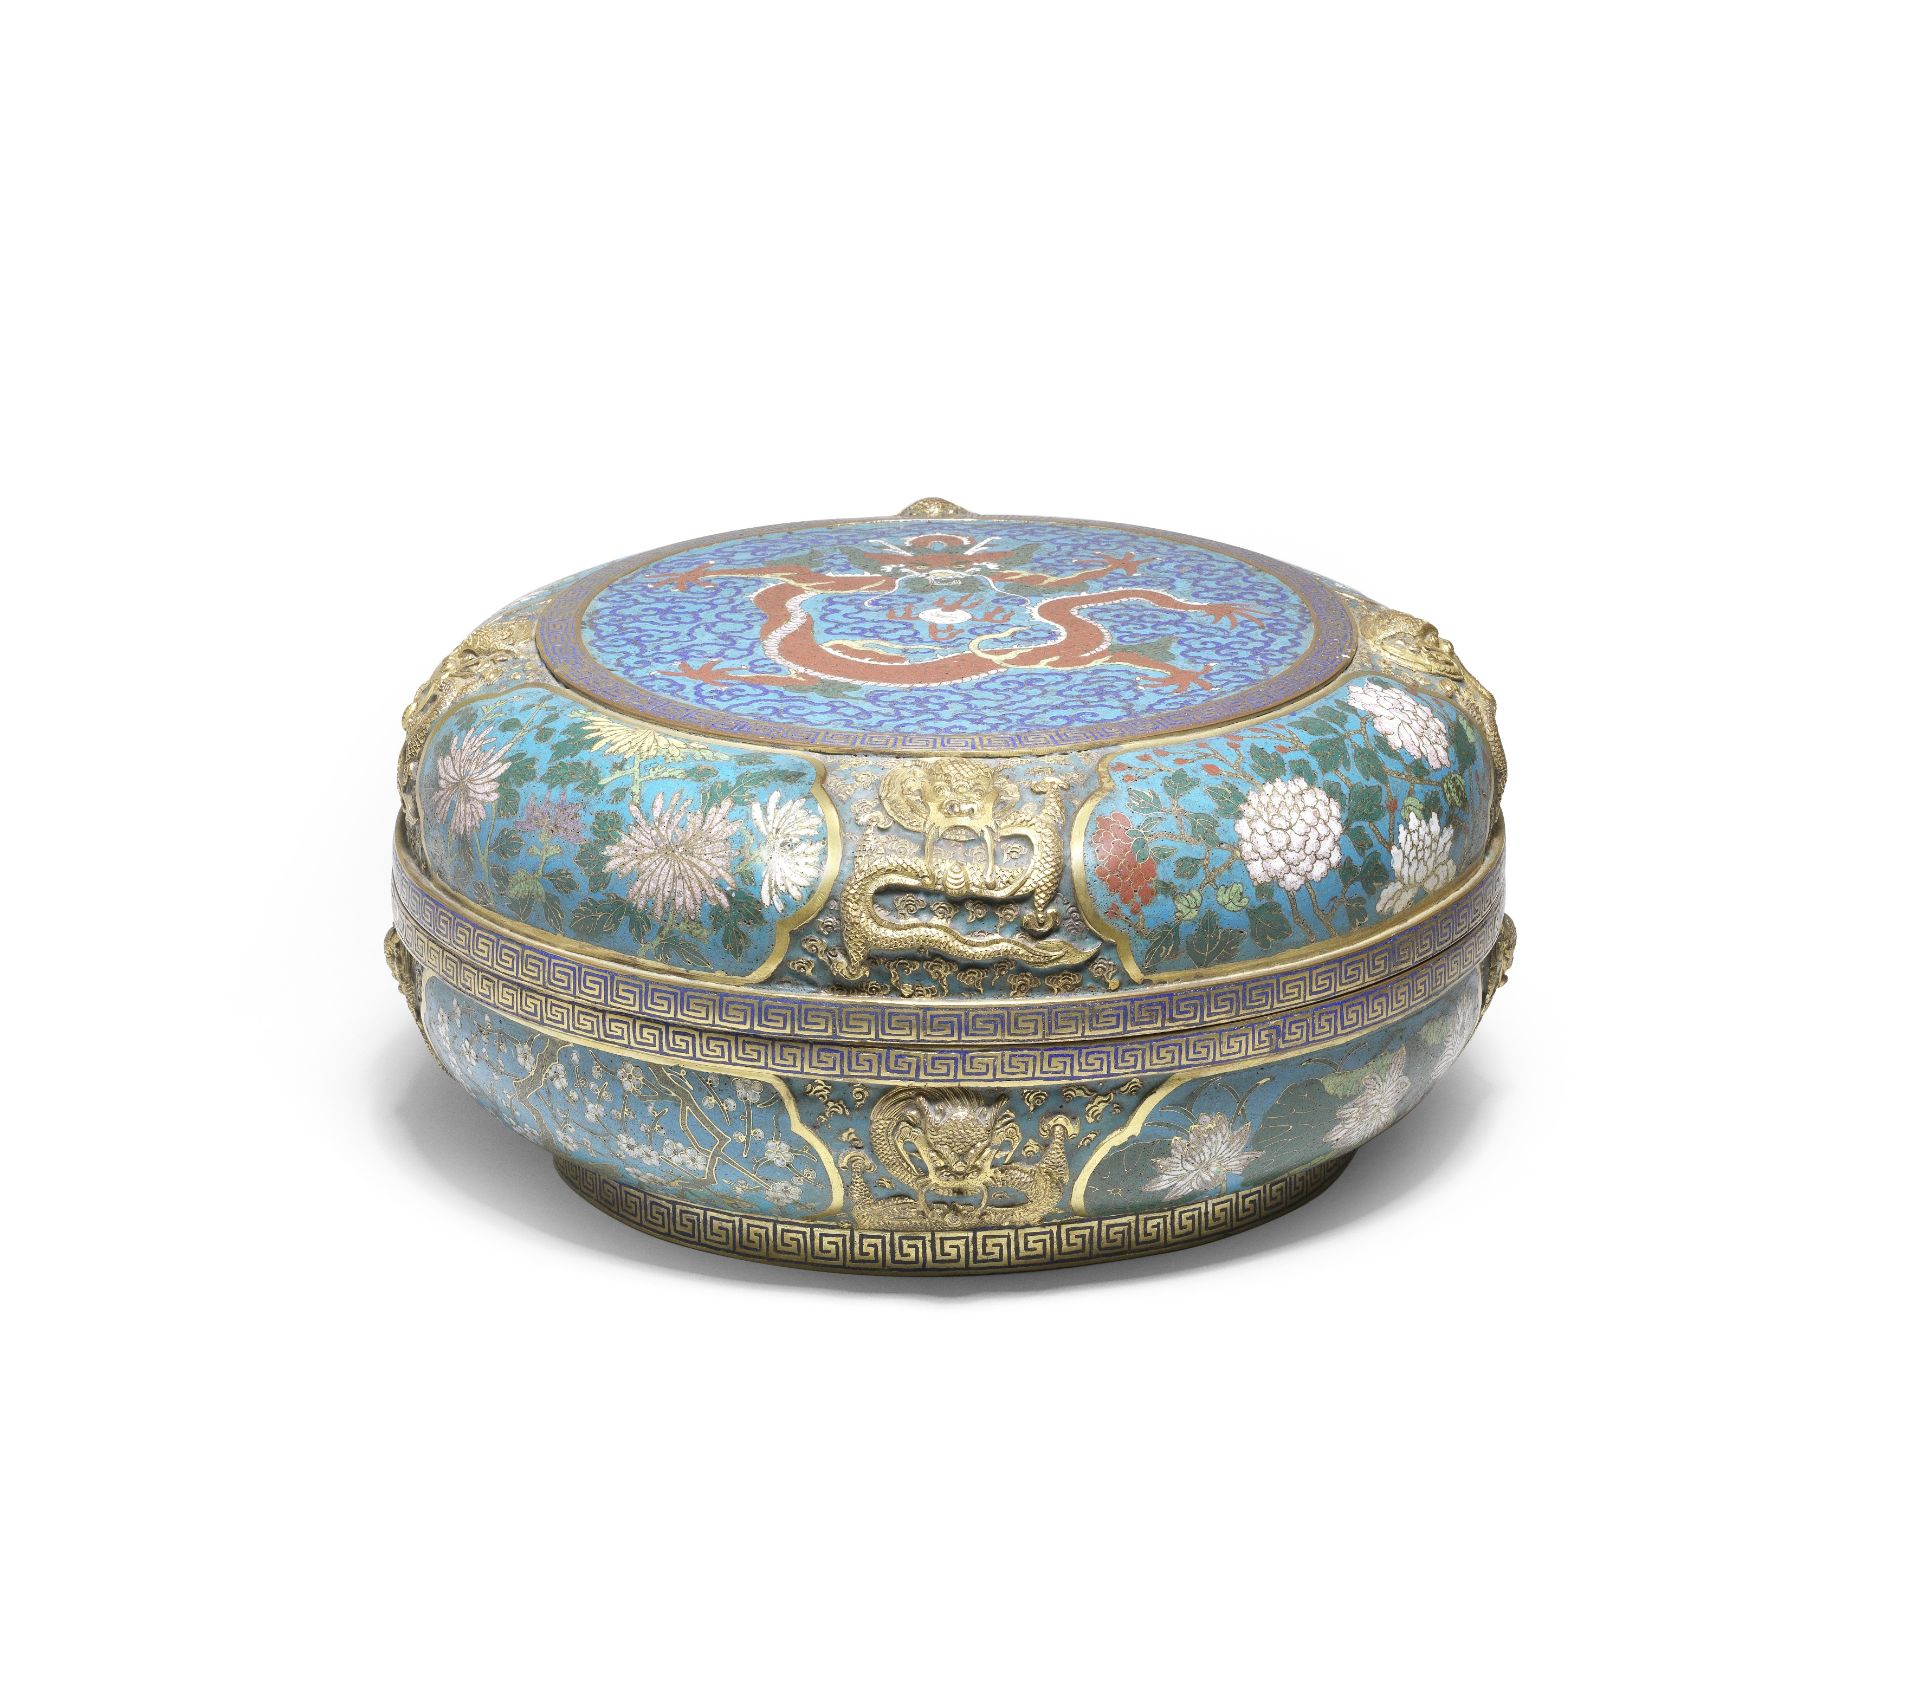 A LARGE CLOISONN&#201; ENAMEL AND GILT-BRONZE 'DRAGON' BOX AND COVER Late Qing Dynasty (2)